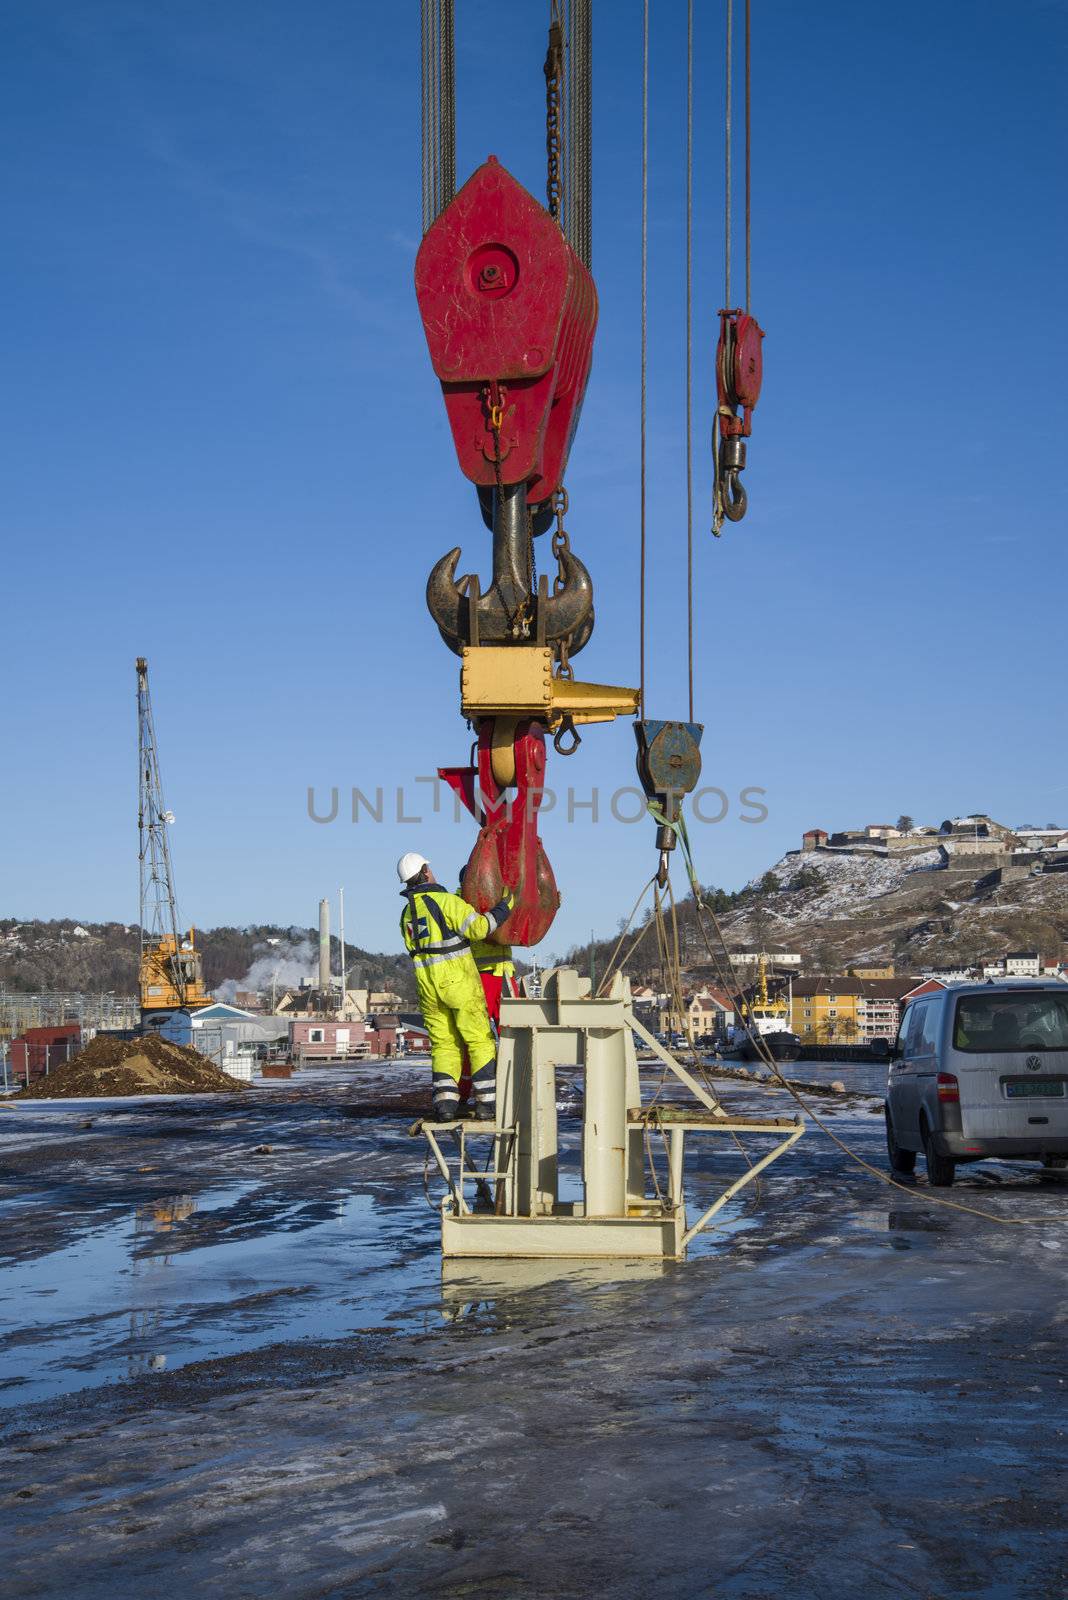 taklift, a giant seagoing crane with a lifting capacity of up to 400 tons at 45 meters, compared to the man on the picture you can see how big the hook is, the picture is shot on the quay at the port of halden february 2013